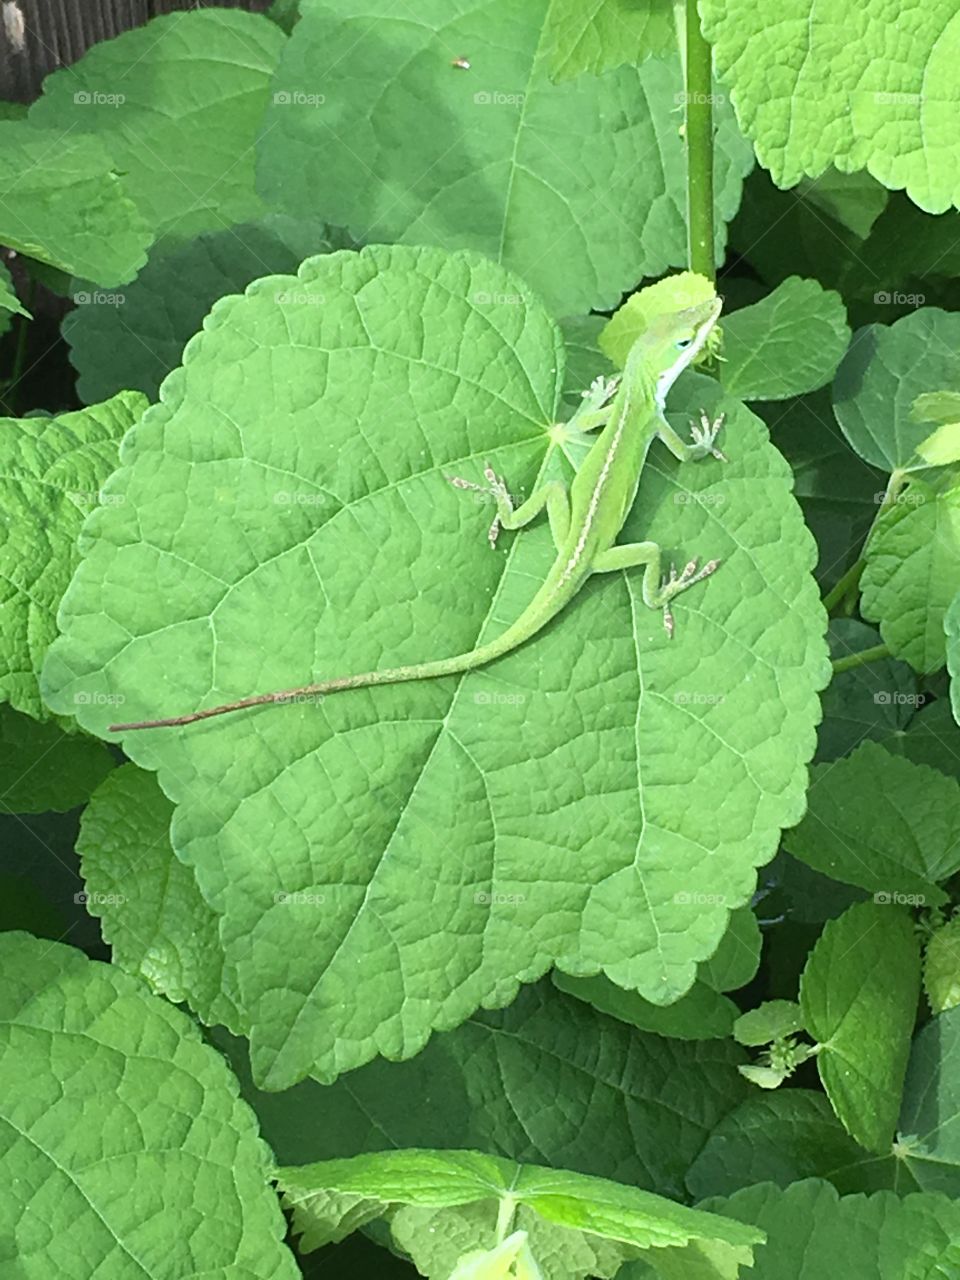 Anole on Green